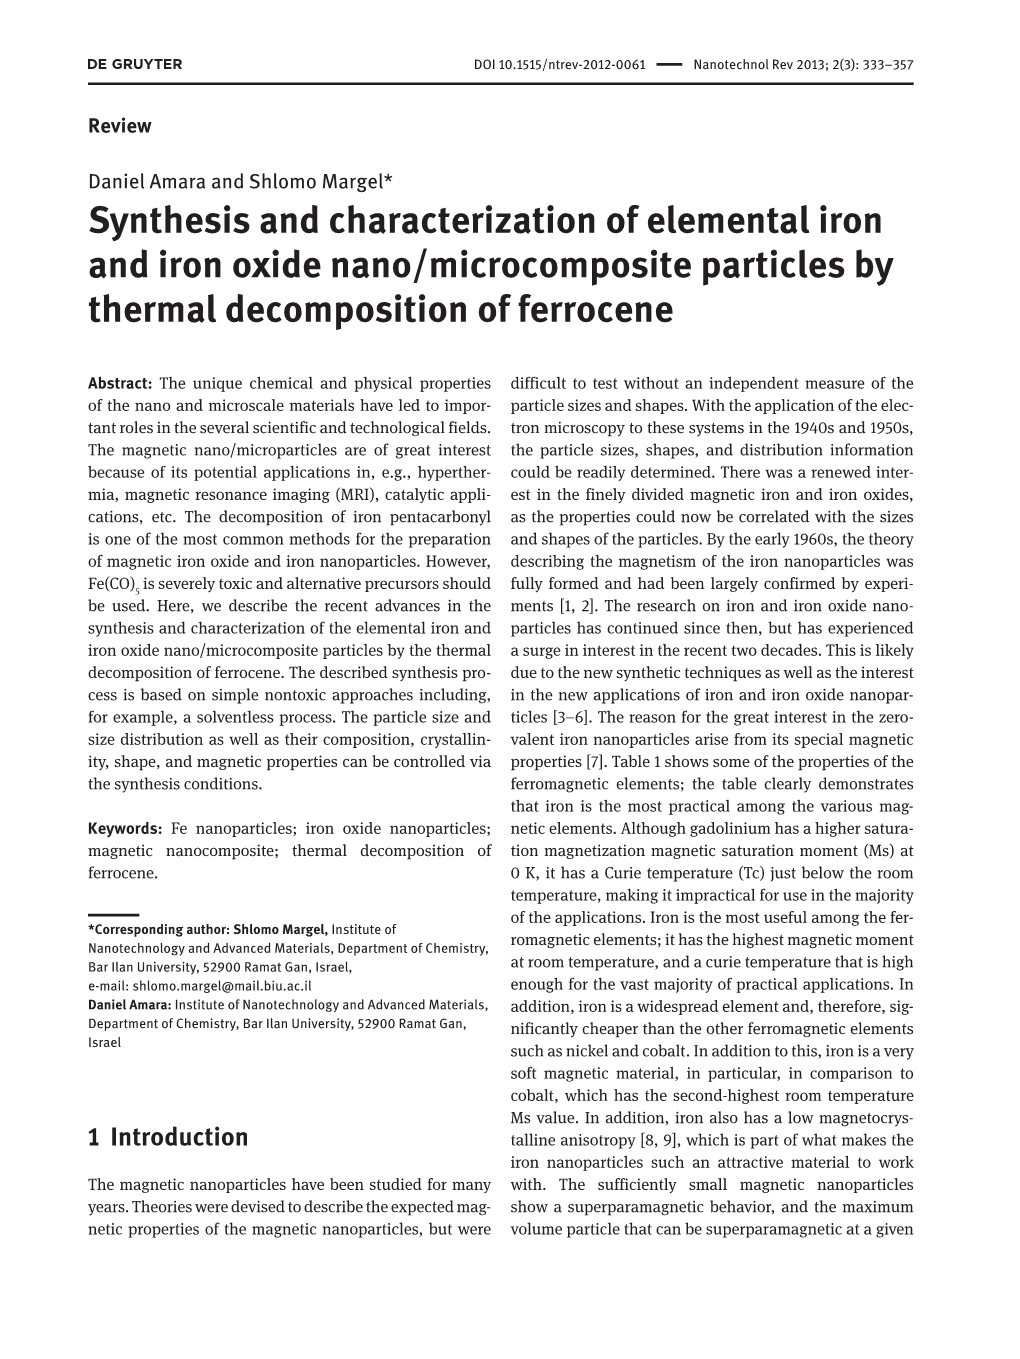 Synthesis and Characterization of Elemental Iron and Iron Oxide Nano/Microcomposite Particles by Thermal Decomposition of Ferrocene